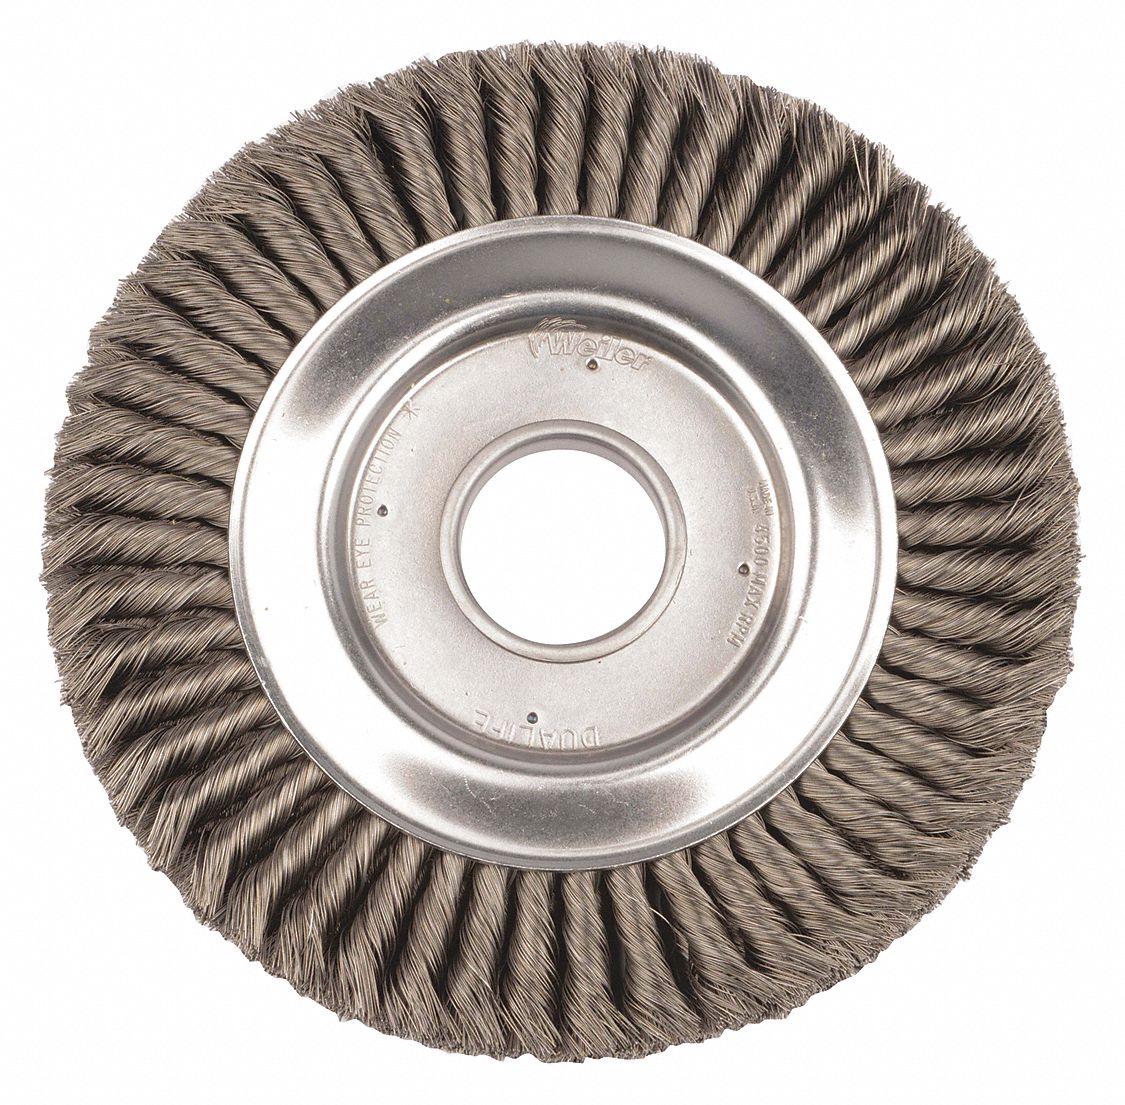 38P640 - 10In Knot Wire Wheel 2In Arbor Full Twis